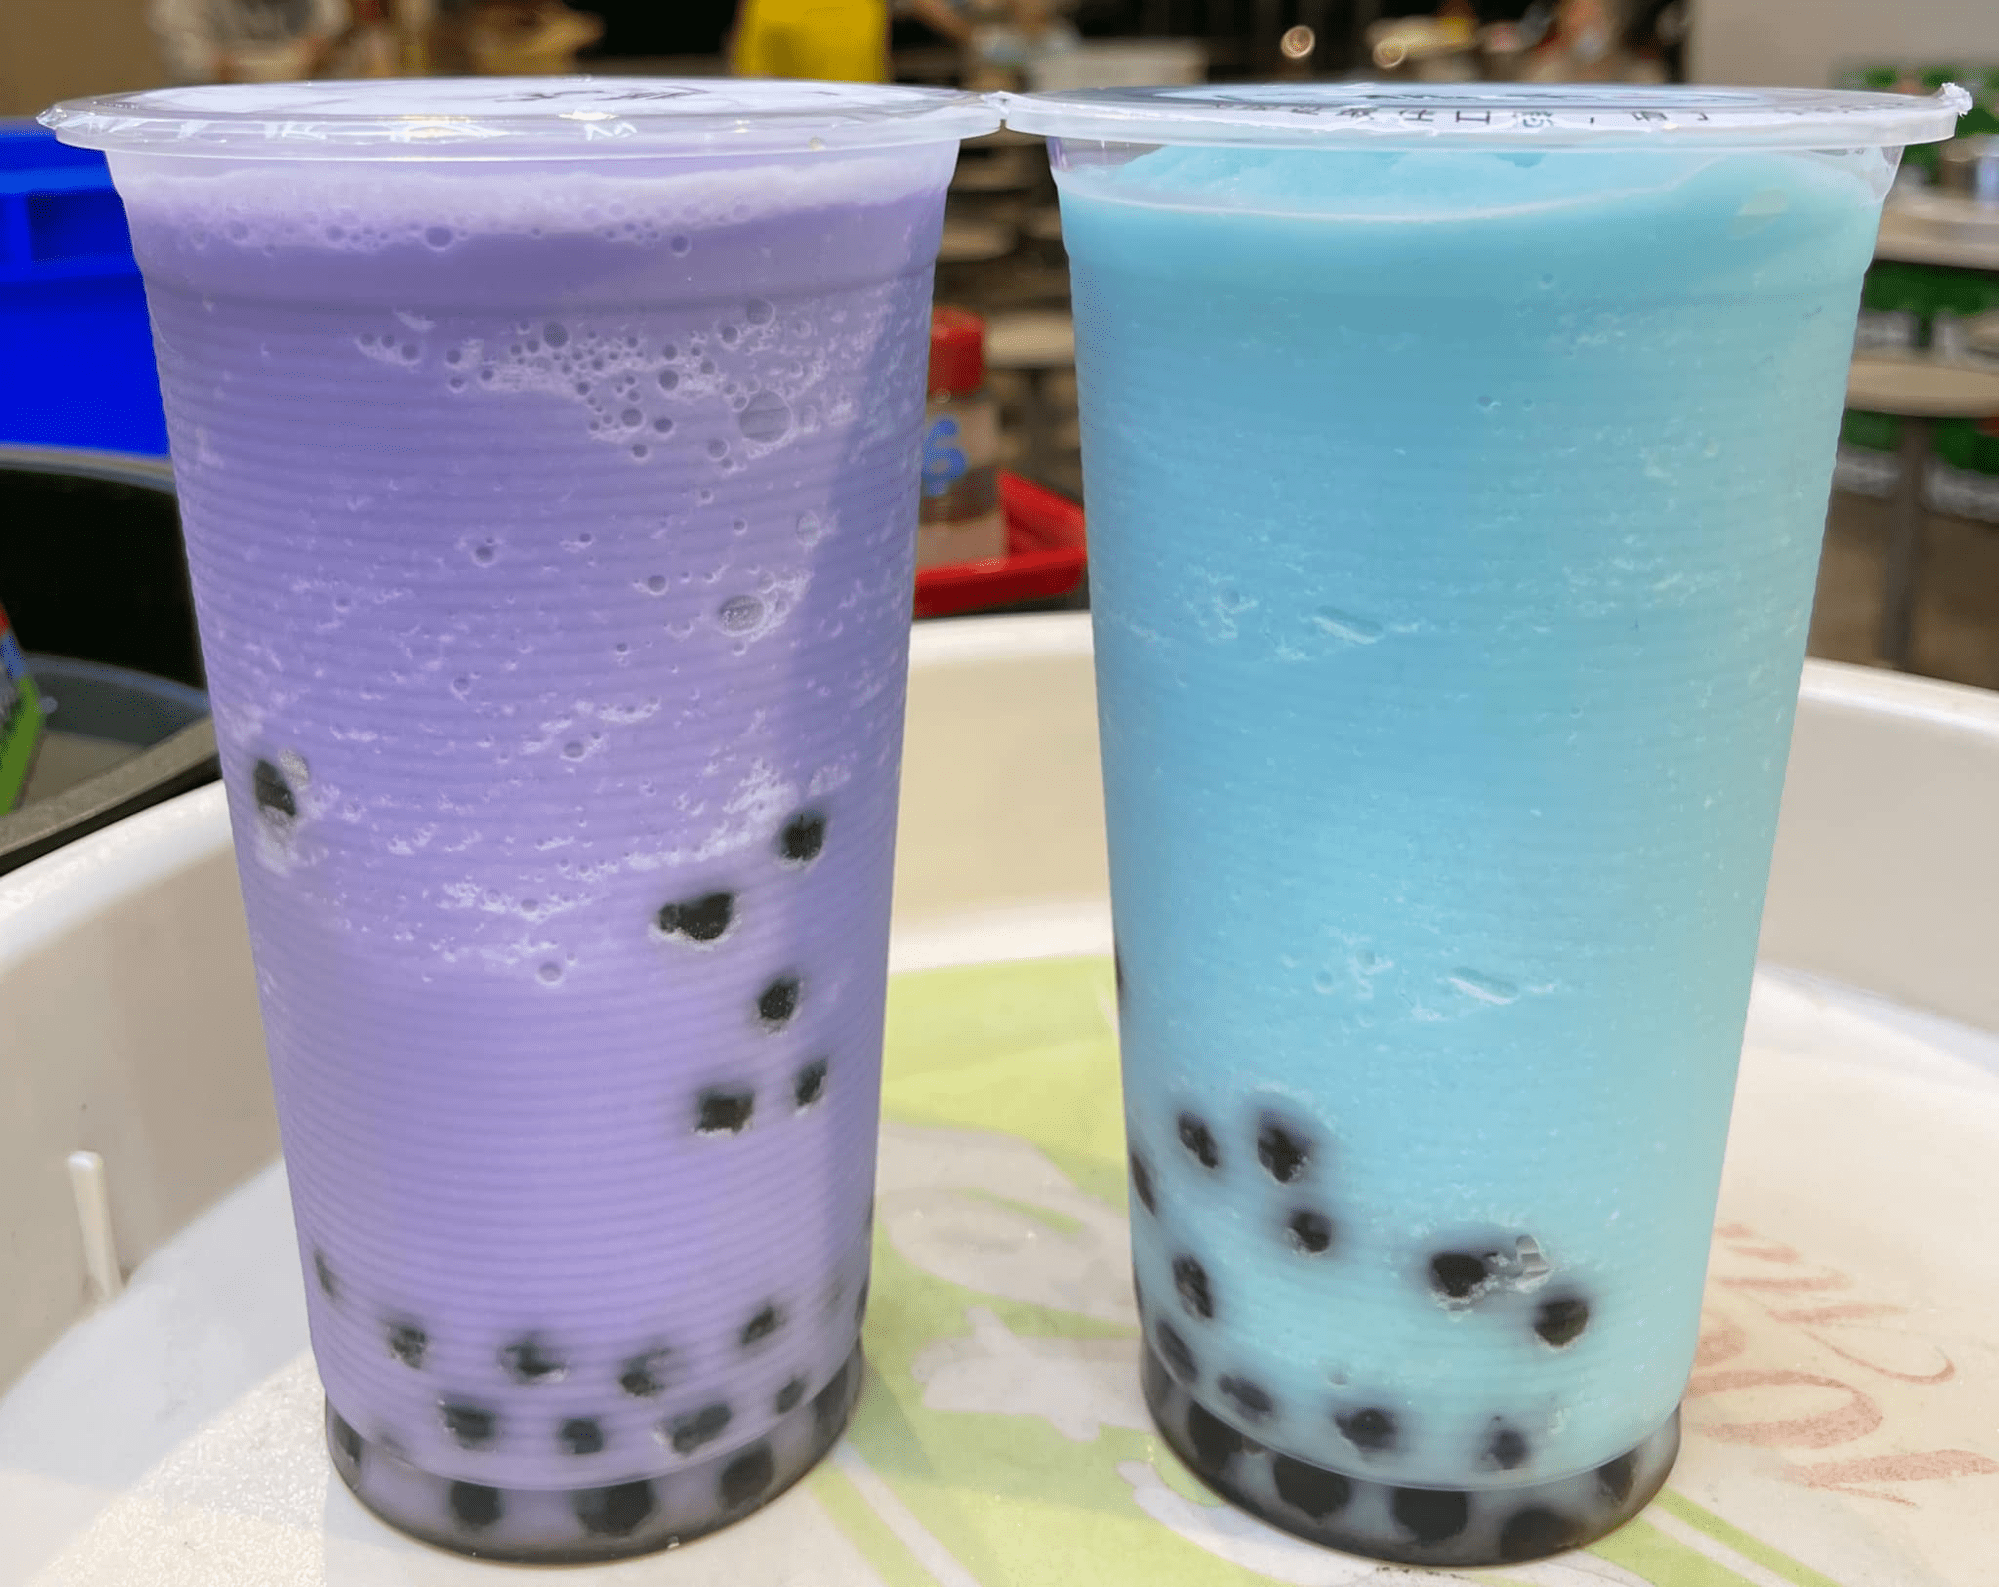 Most Iconic Changes in Singapore - bubble tea